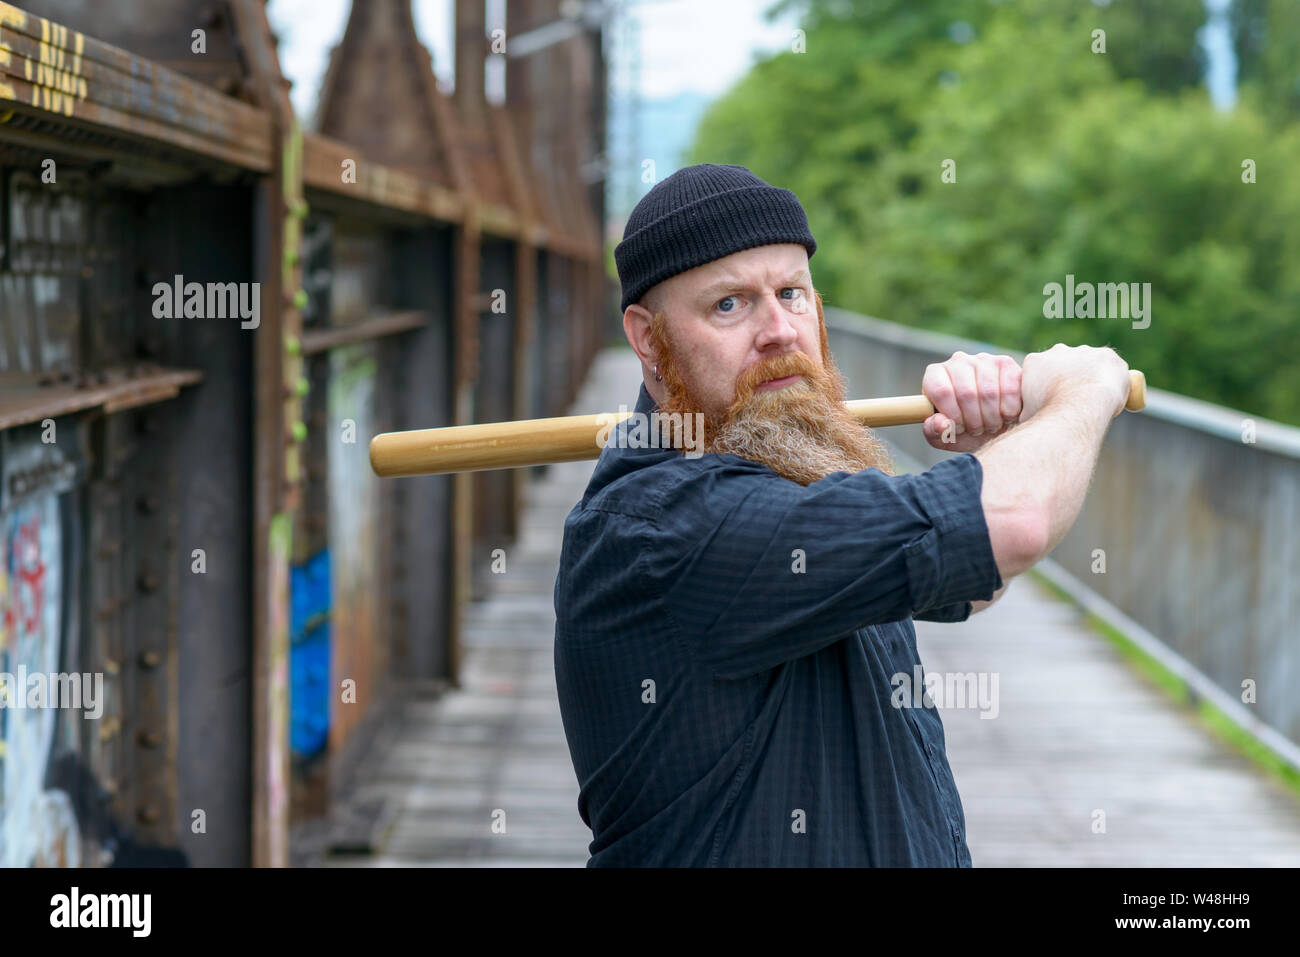 Threatening angry man with a red beard wearing a knitted beanie hat swinging a baseball bat over his shoulder while focusing his eyes on the camera Stock Photo